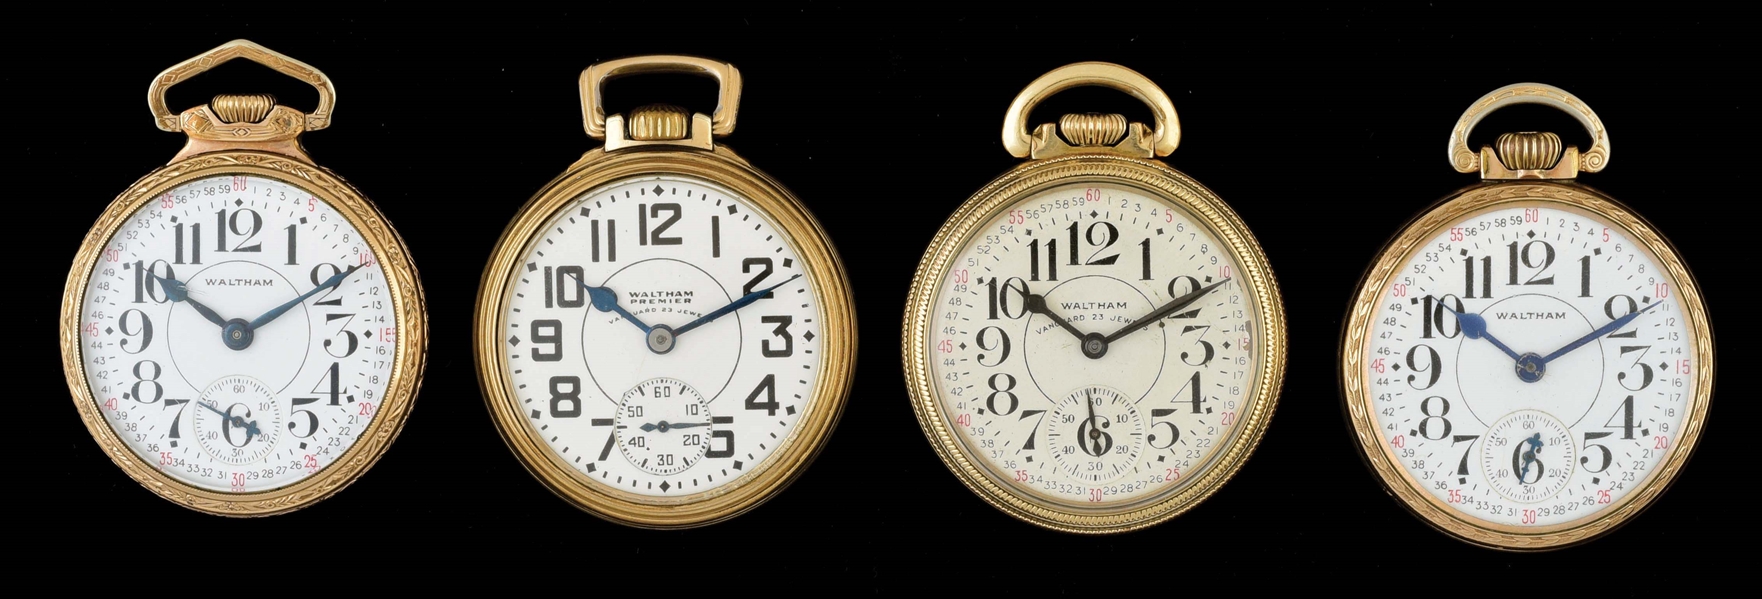 LOT OF 4: WALTHAM GOLD FILLED MODEL 1908 RR GRADE O/F POCKET WATCHES.